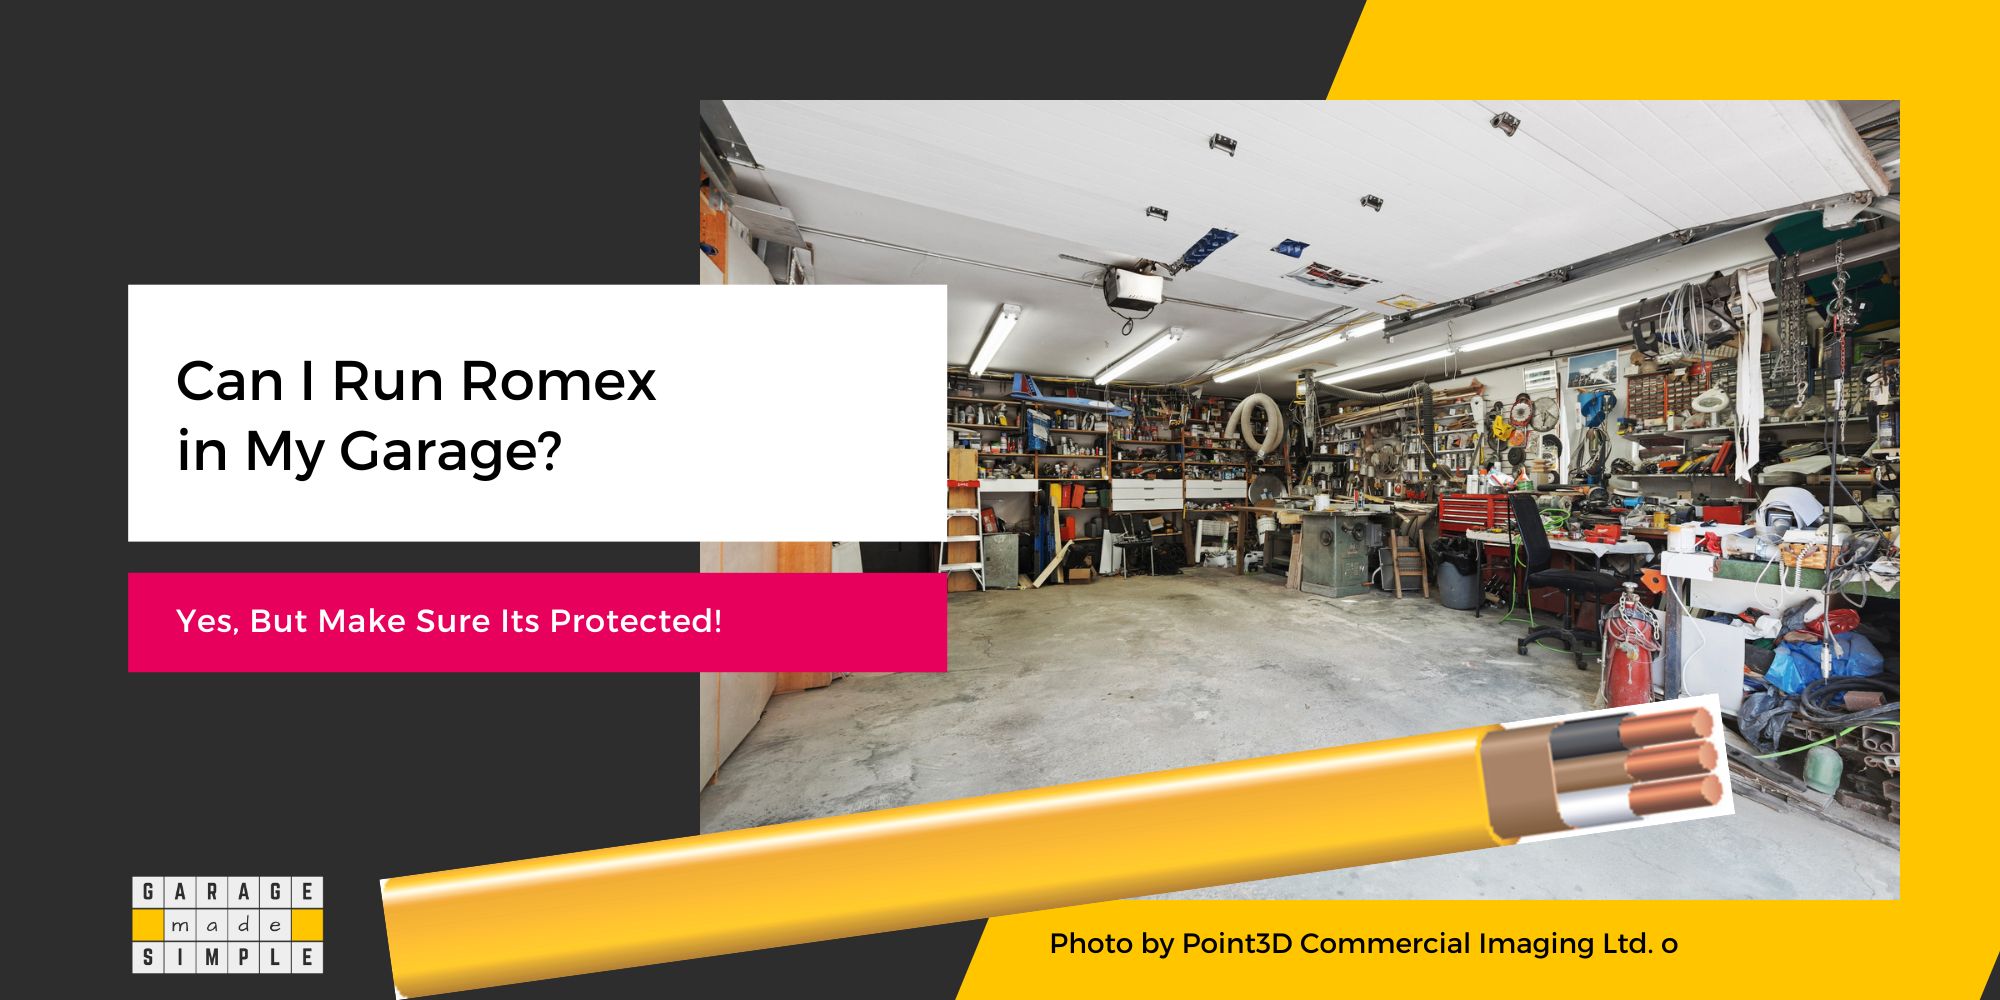 Can I Run Romex in My Garage? (Yes, But Make Sure Its Protected!)